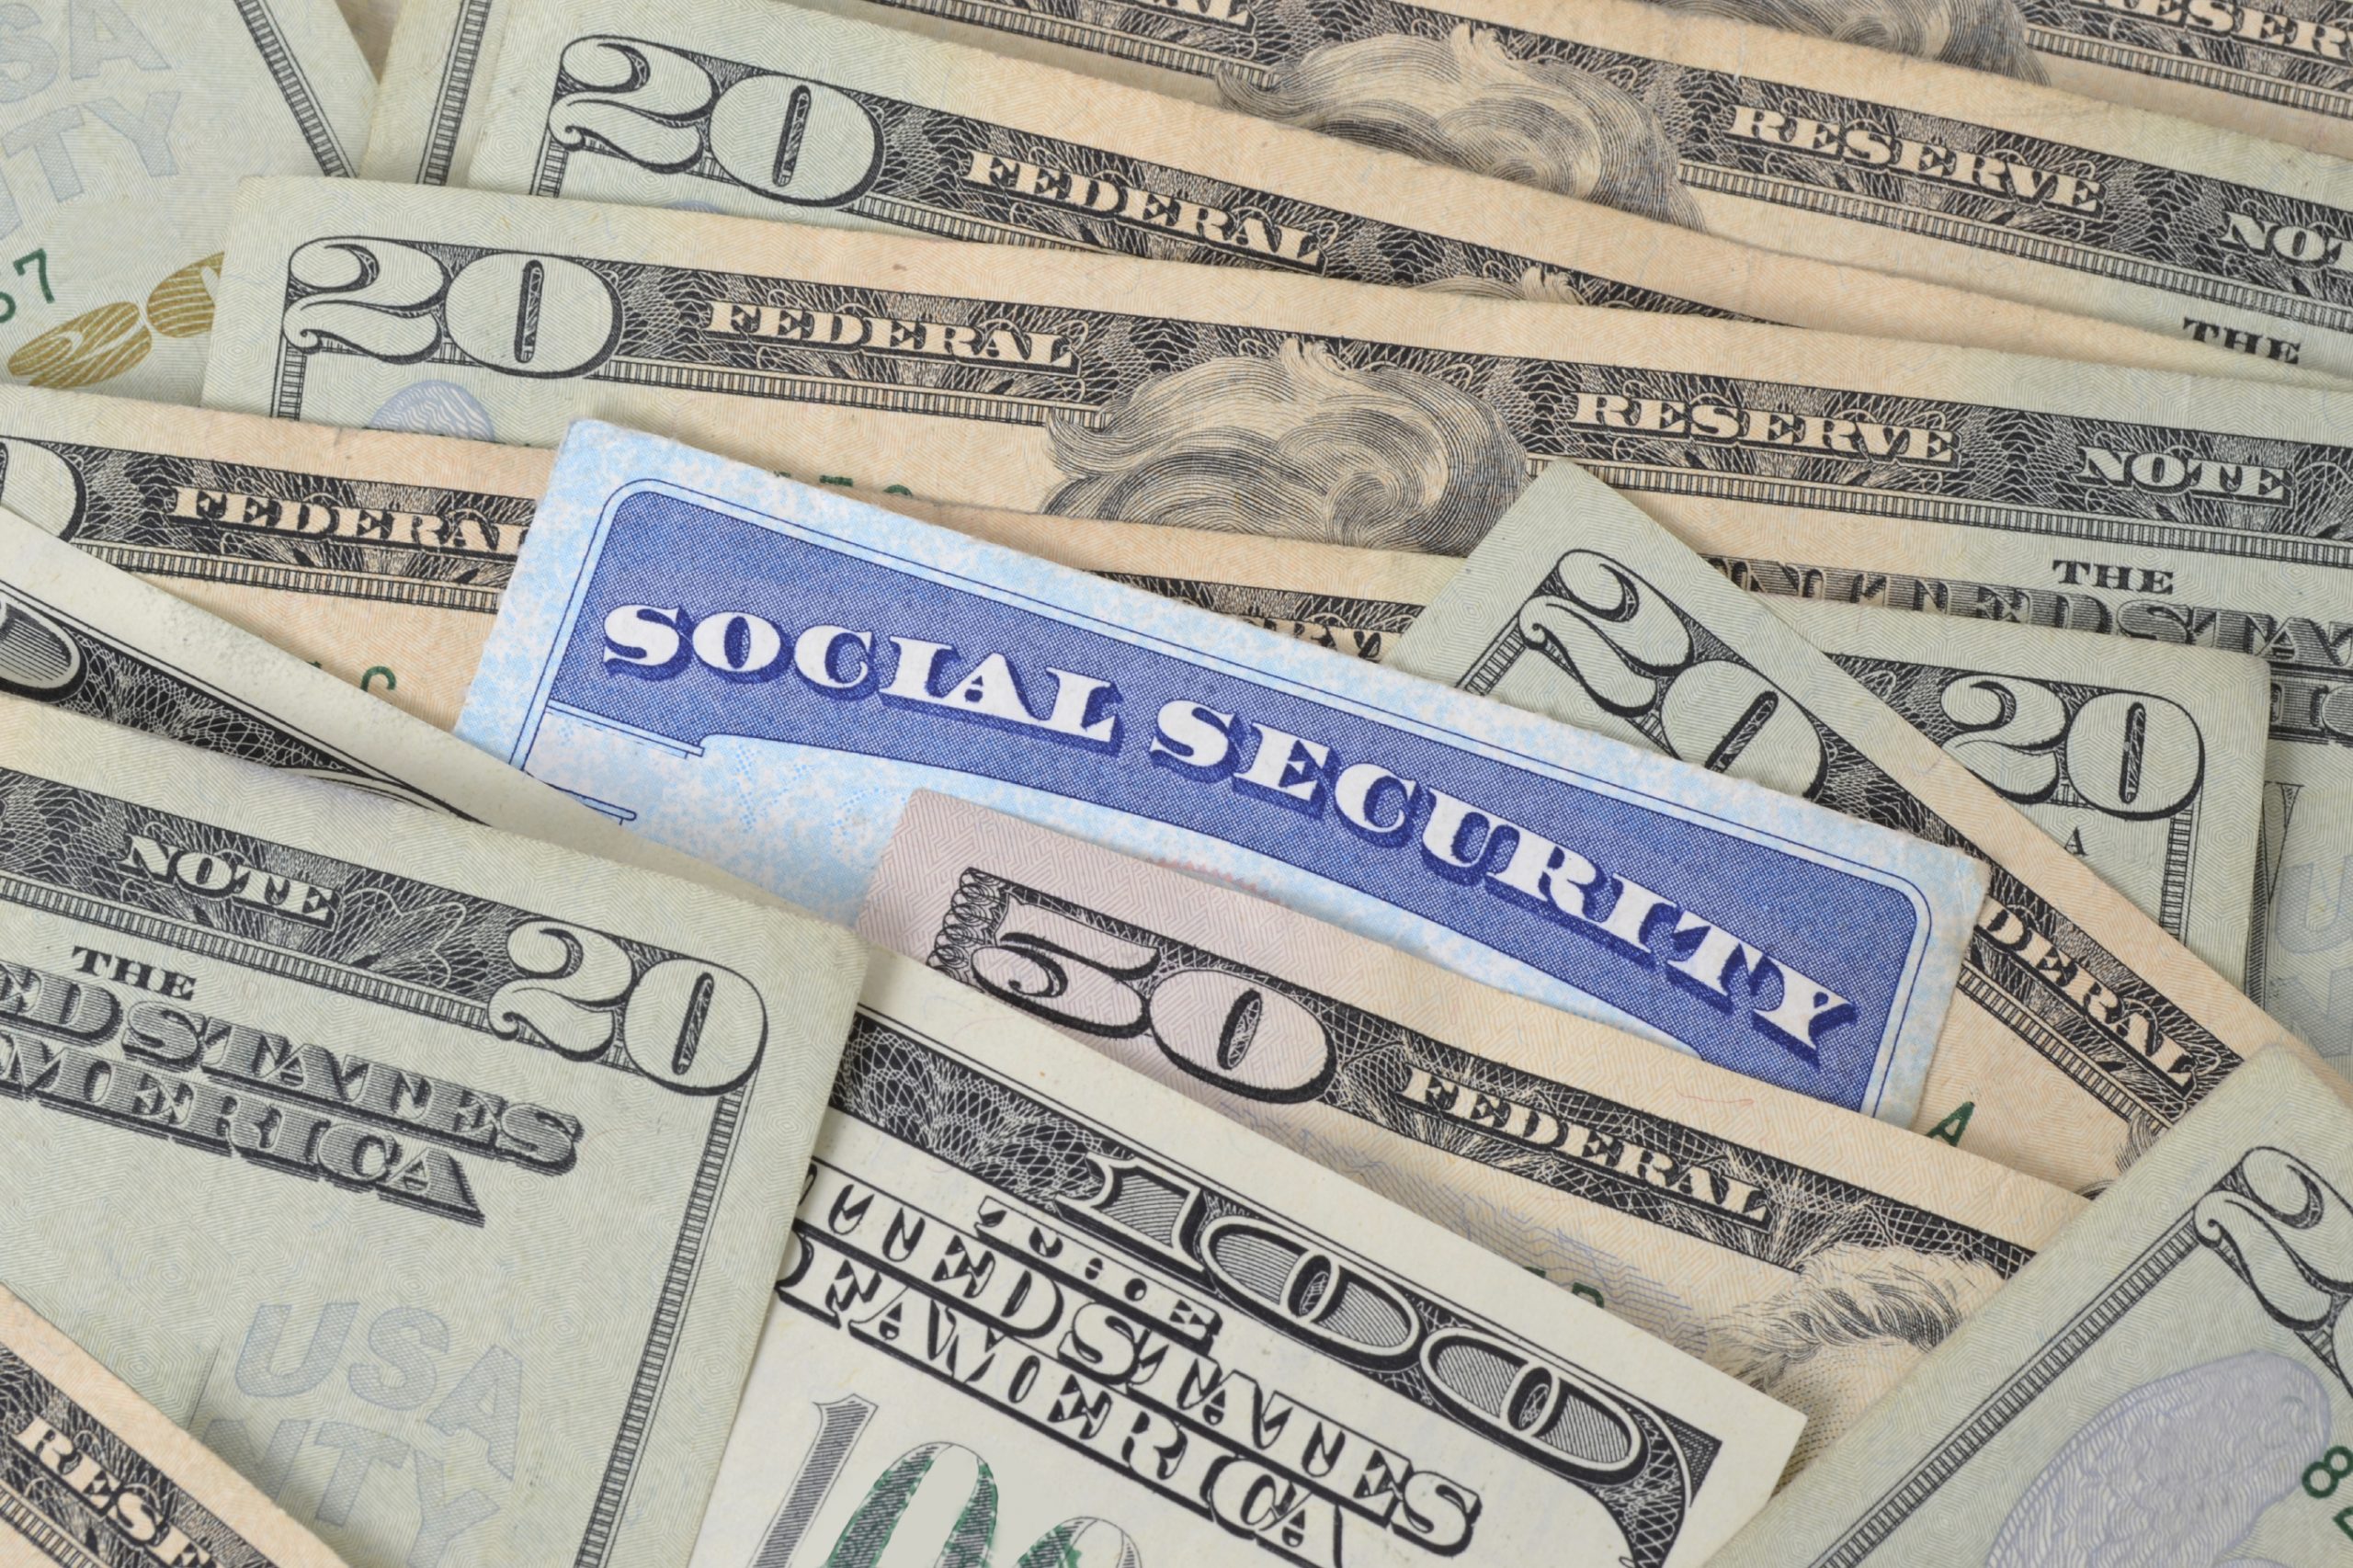 Social Security update Direct payment worth 914 arriving in 26 days